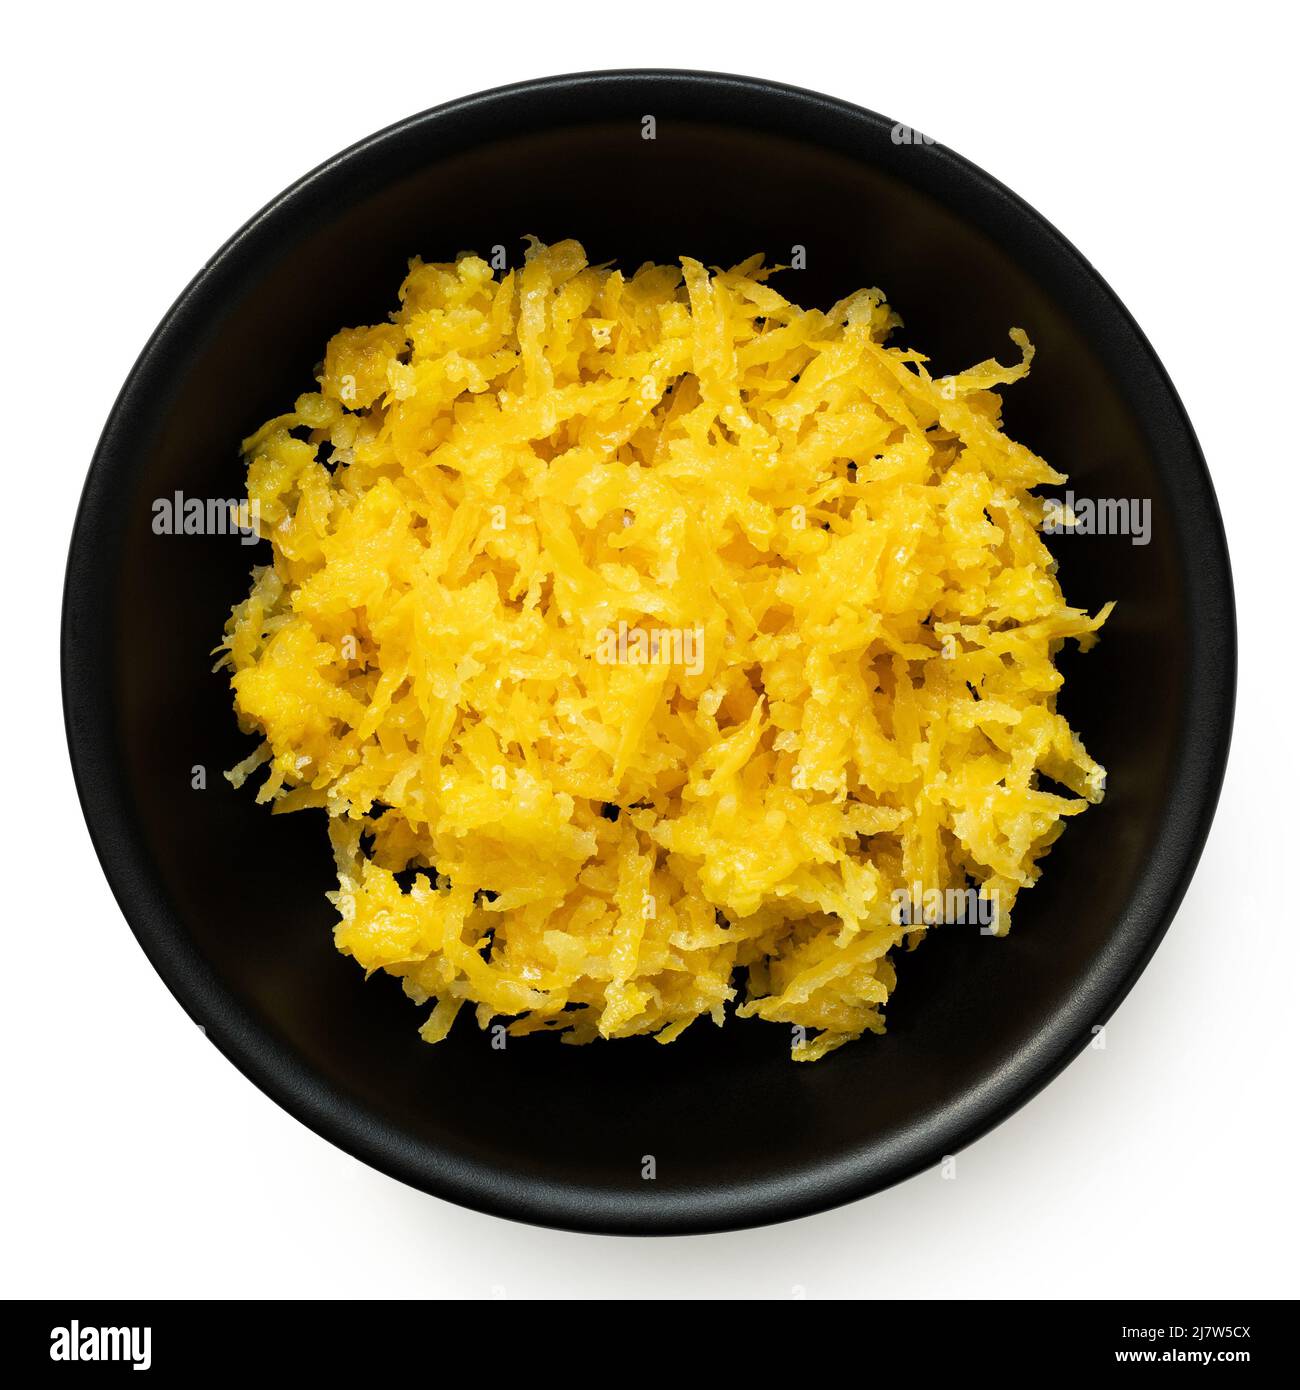 Freshly grated lemon zest in a black ceramic bowl isolated on white. Top view. Stock Photo